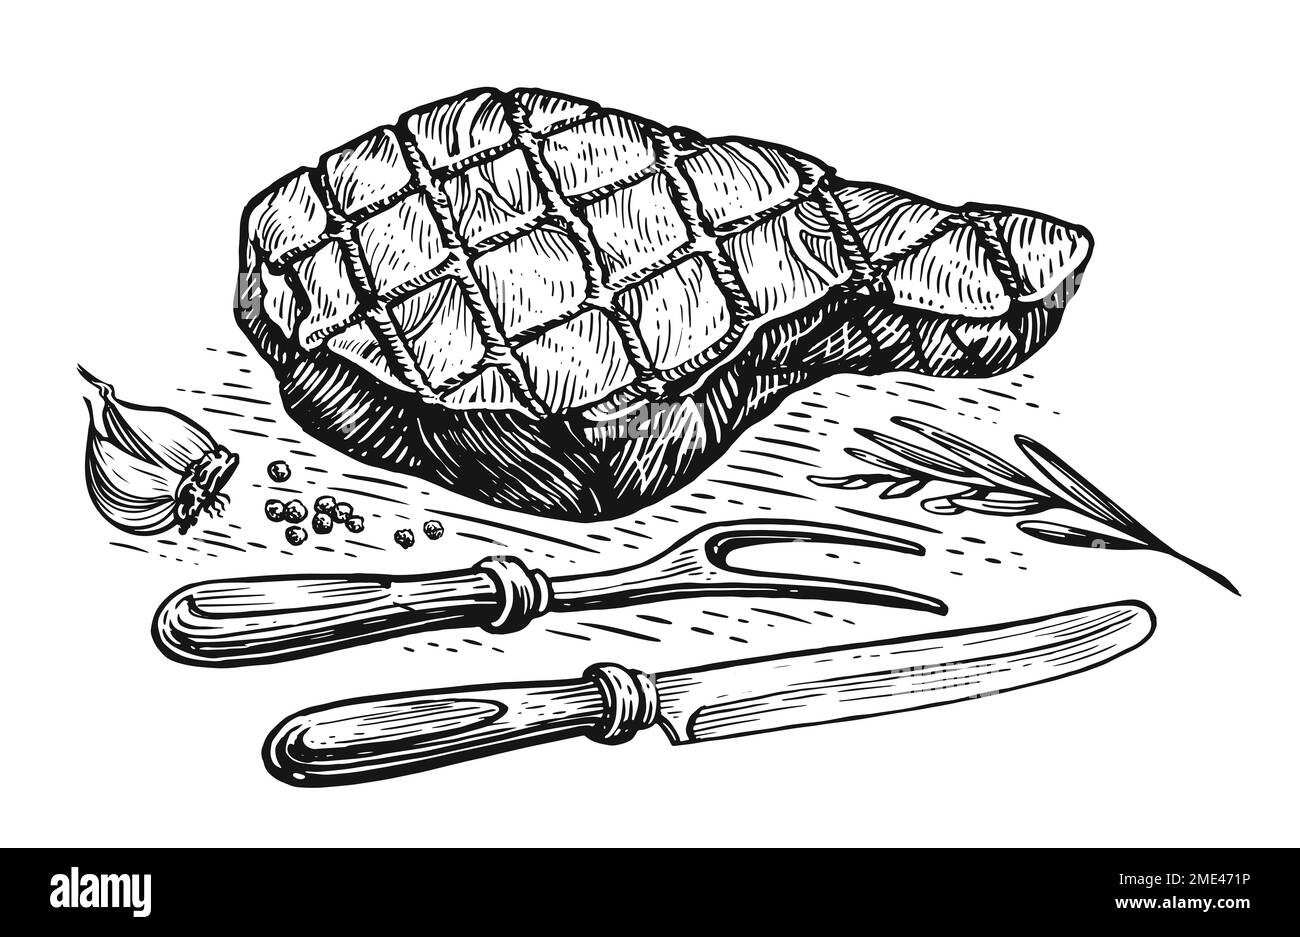 Freshly grilled steak with knife and fork. Cooking beef meat, barbecue. Hand drawn sketch illustration Stock Photo